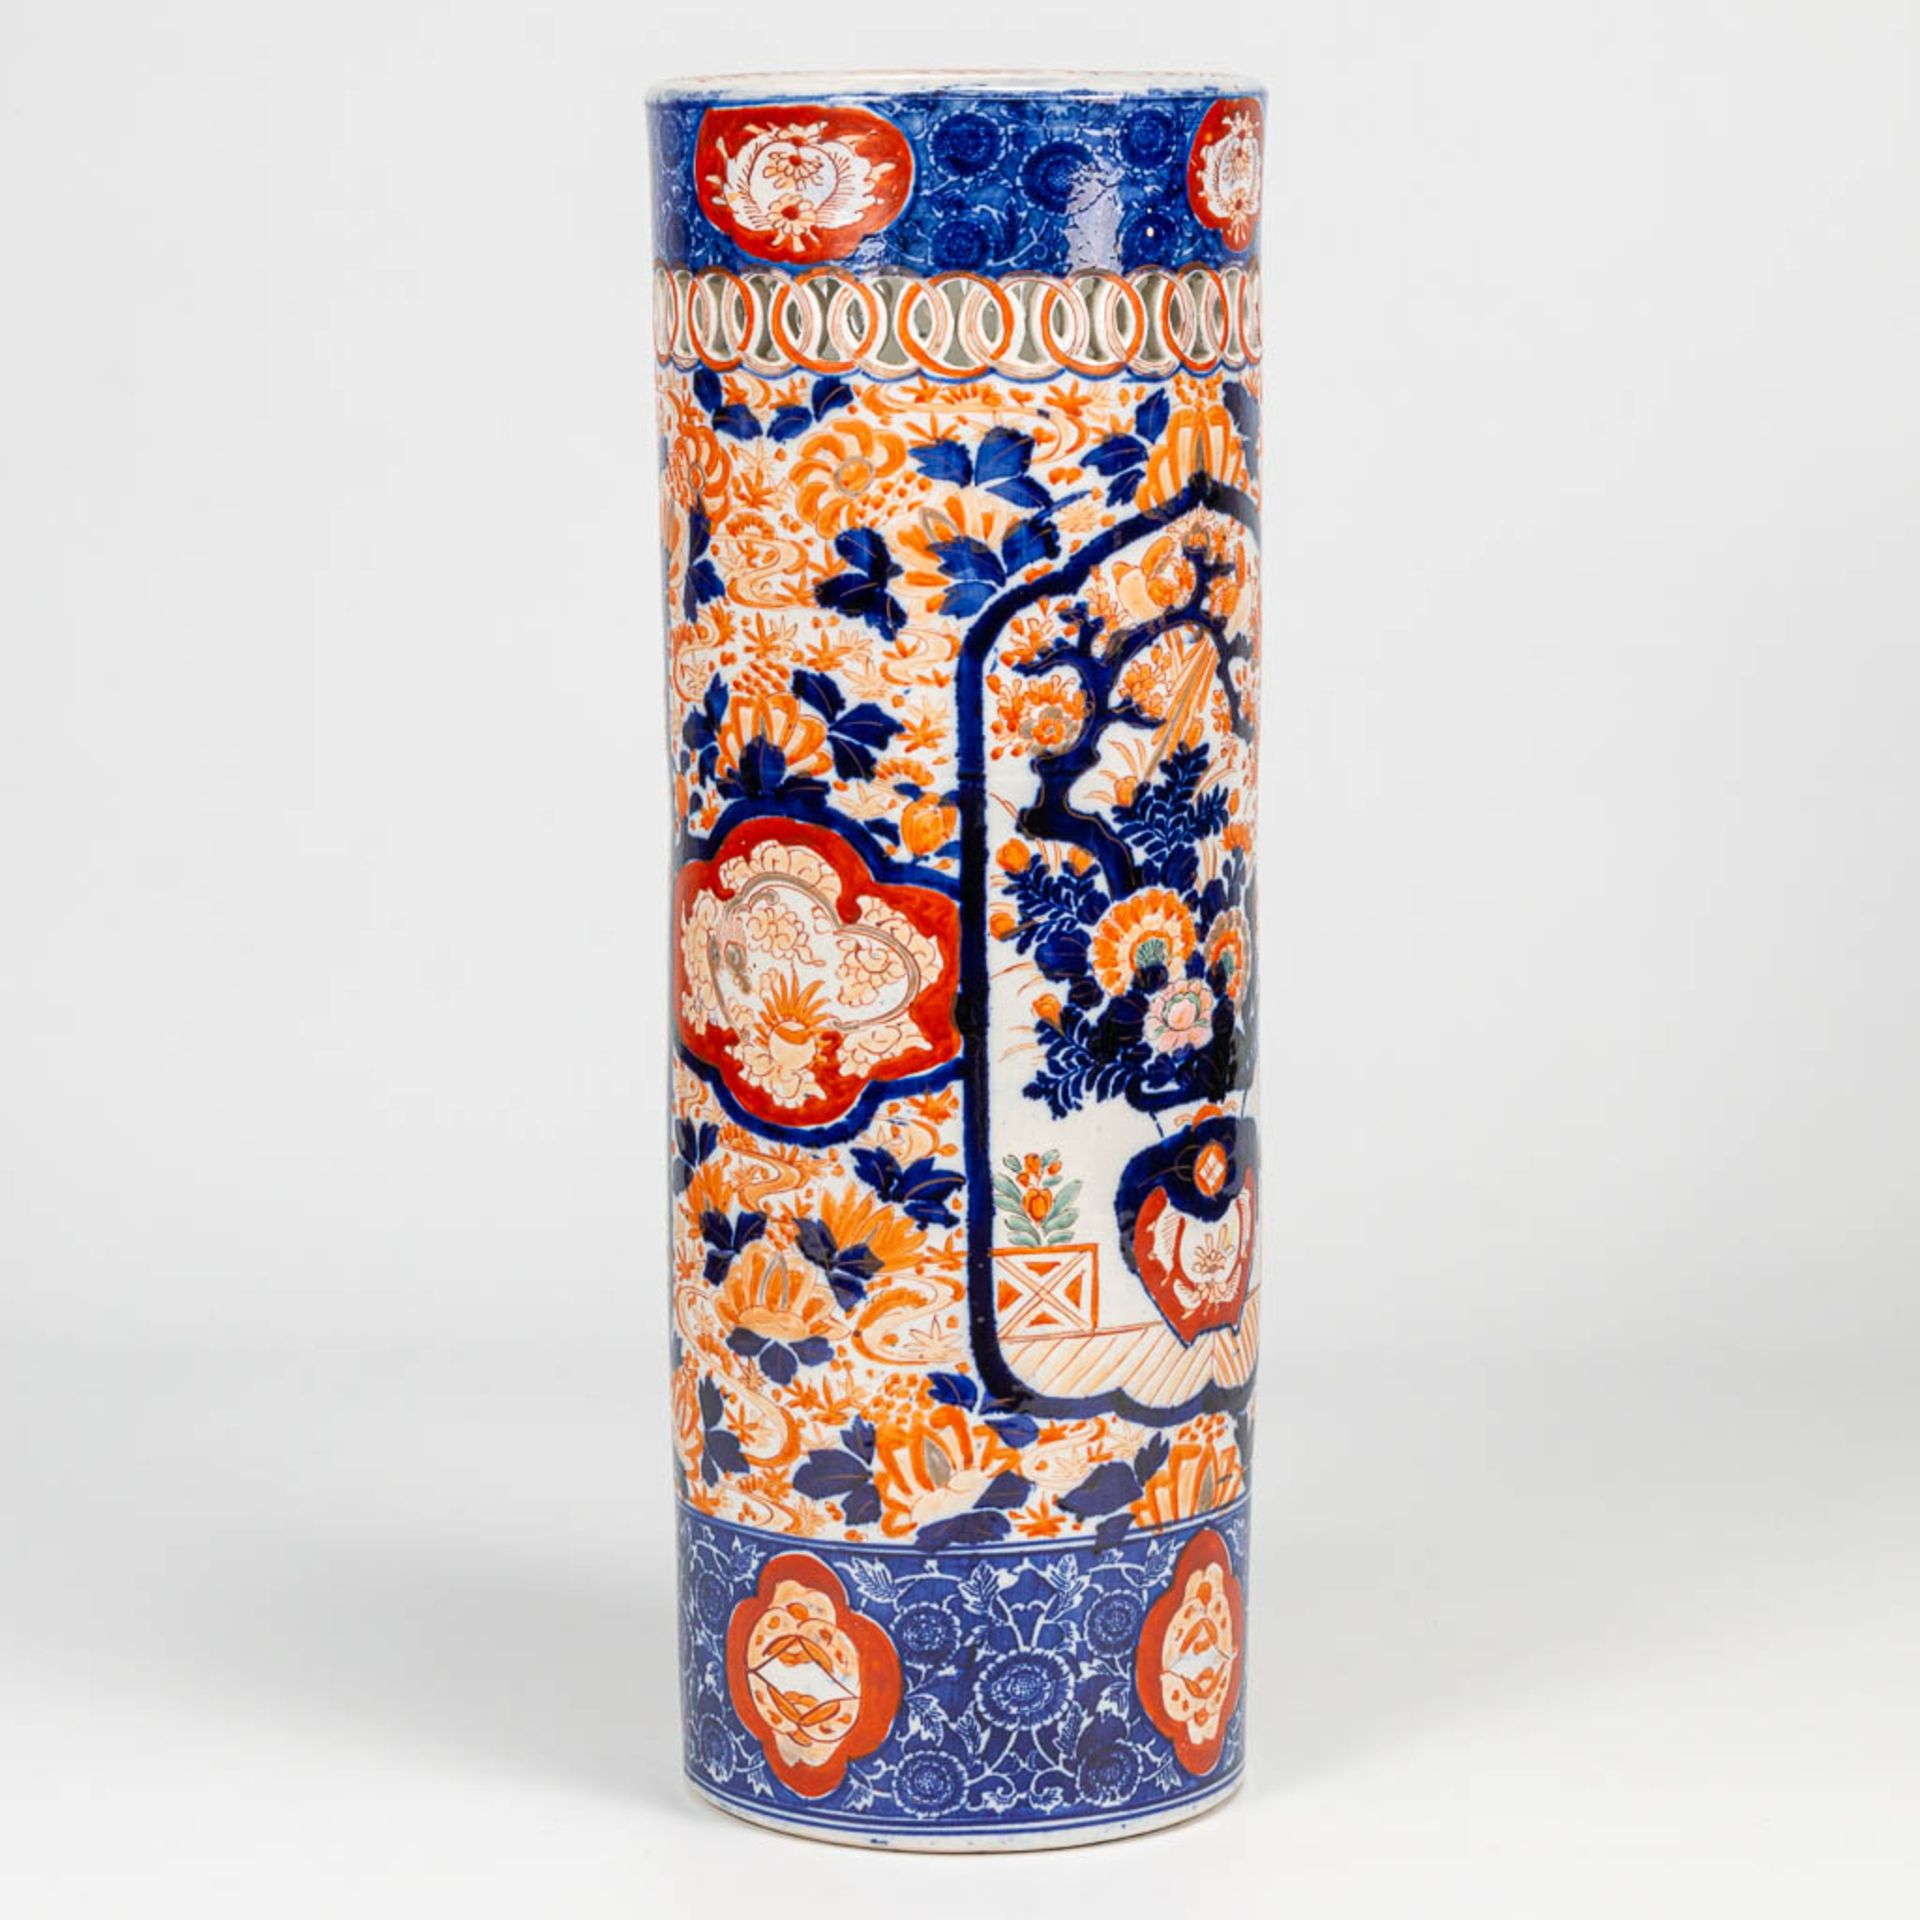 An Imari umbrella stand, vase made of porcelain in Japan. 19th/20th century. (61 x 22 cm) - Image 10 of 17